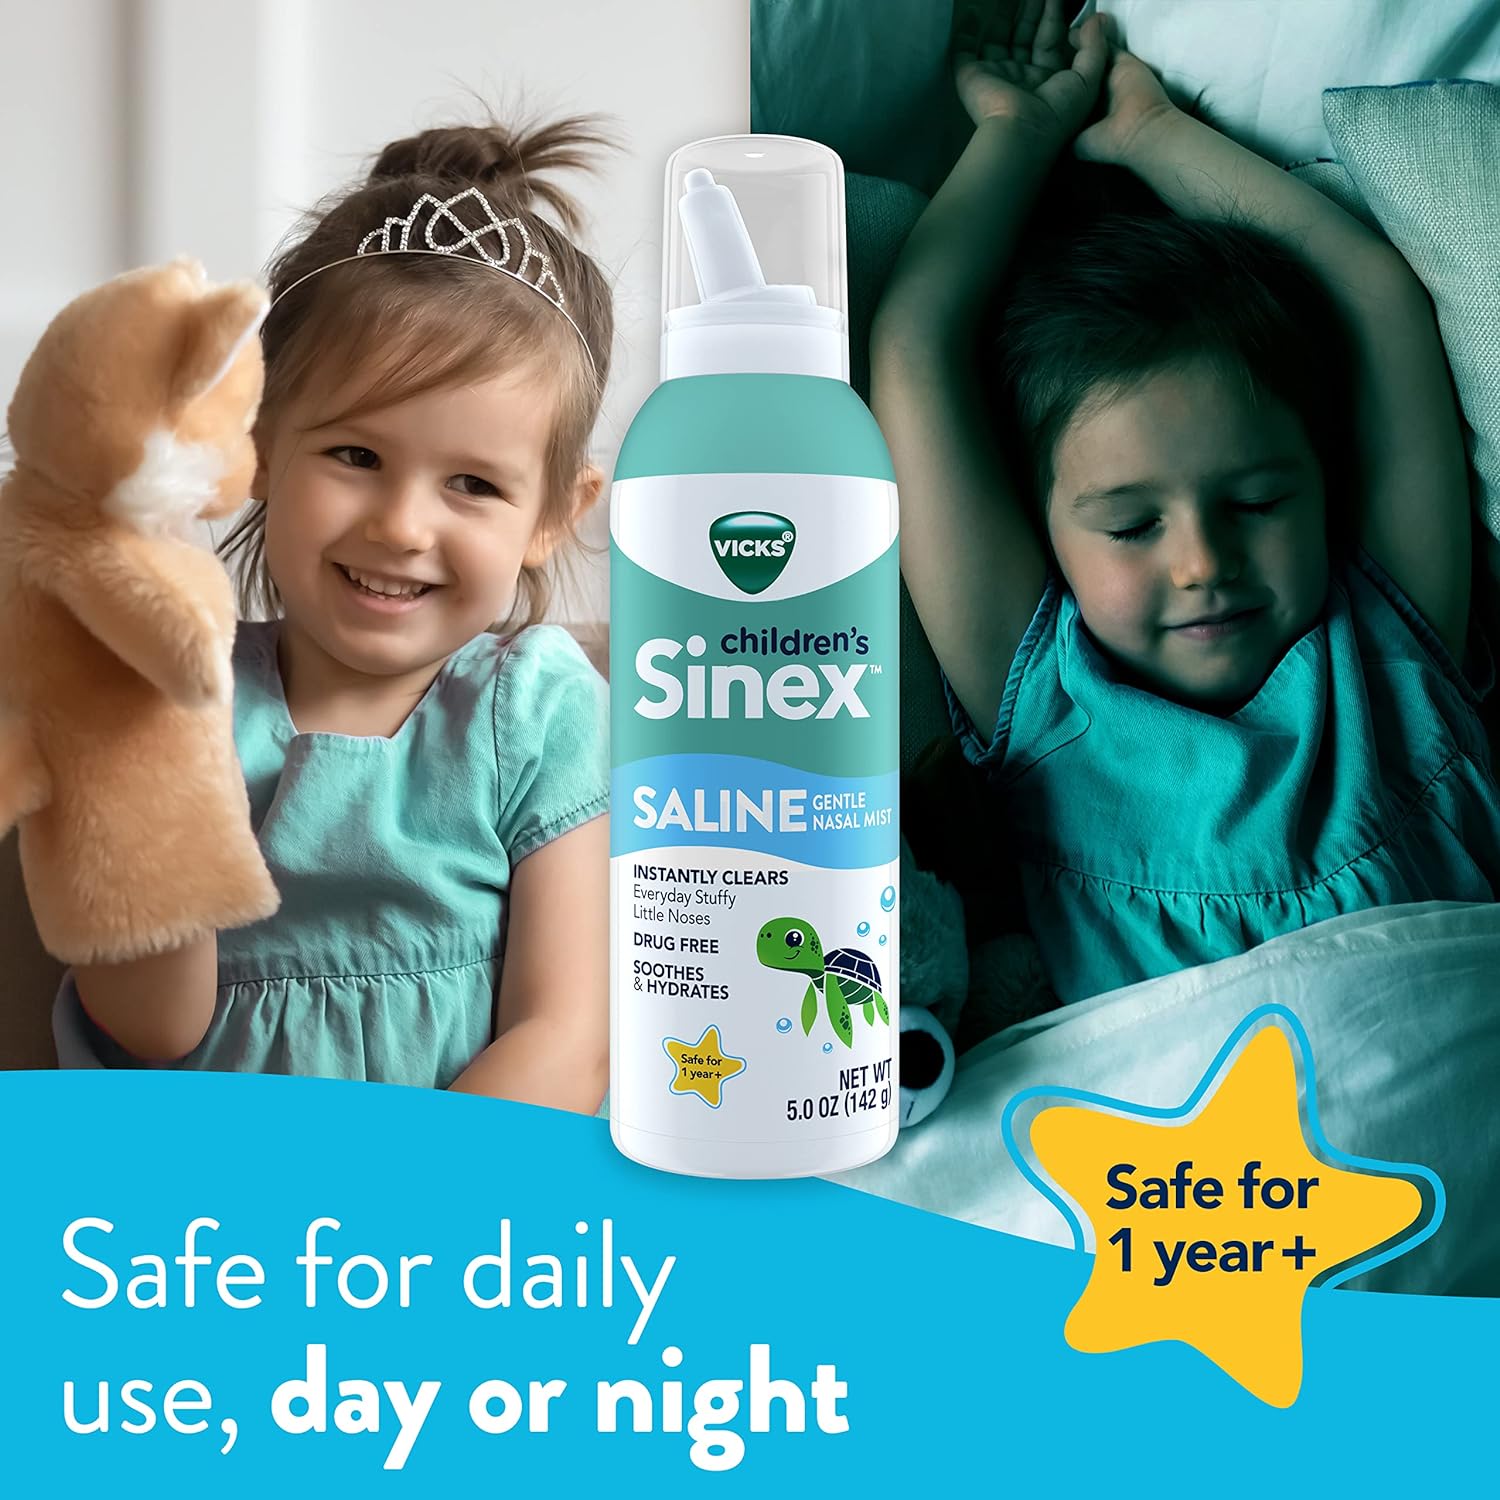 Vicks Sinex, Children's Saline Nasal Spray, Drug Free Ultra Fine Mist with Hint of Aloe, Ages 1+, Fast Everyday Stuffy Nose Relief for Kids, Clear Mucus from a Cold or Allergy, 5 OZ x 2 : Health & Household